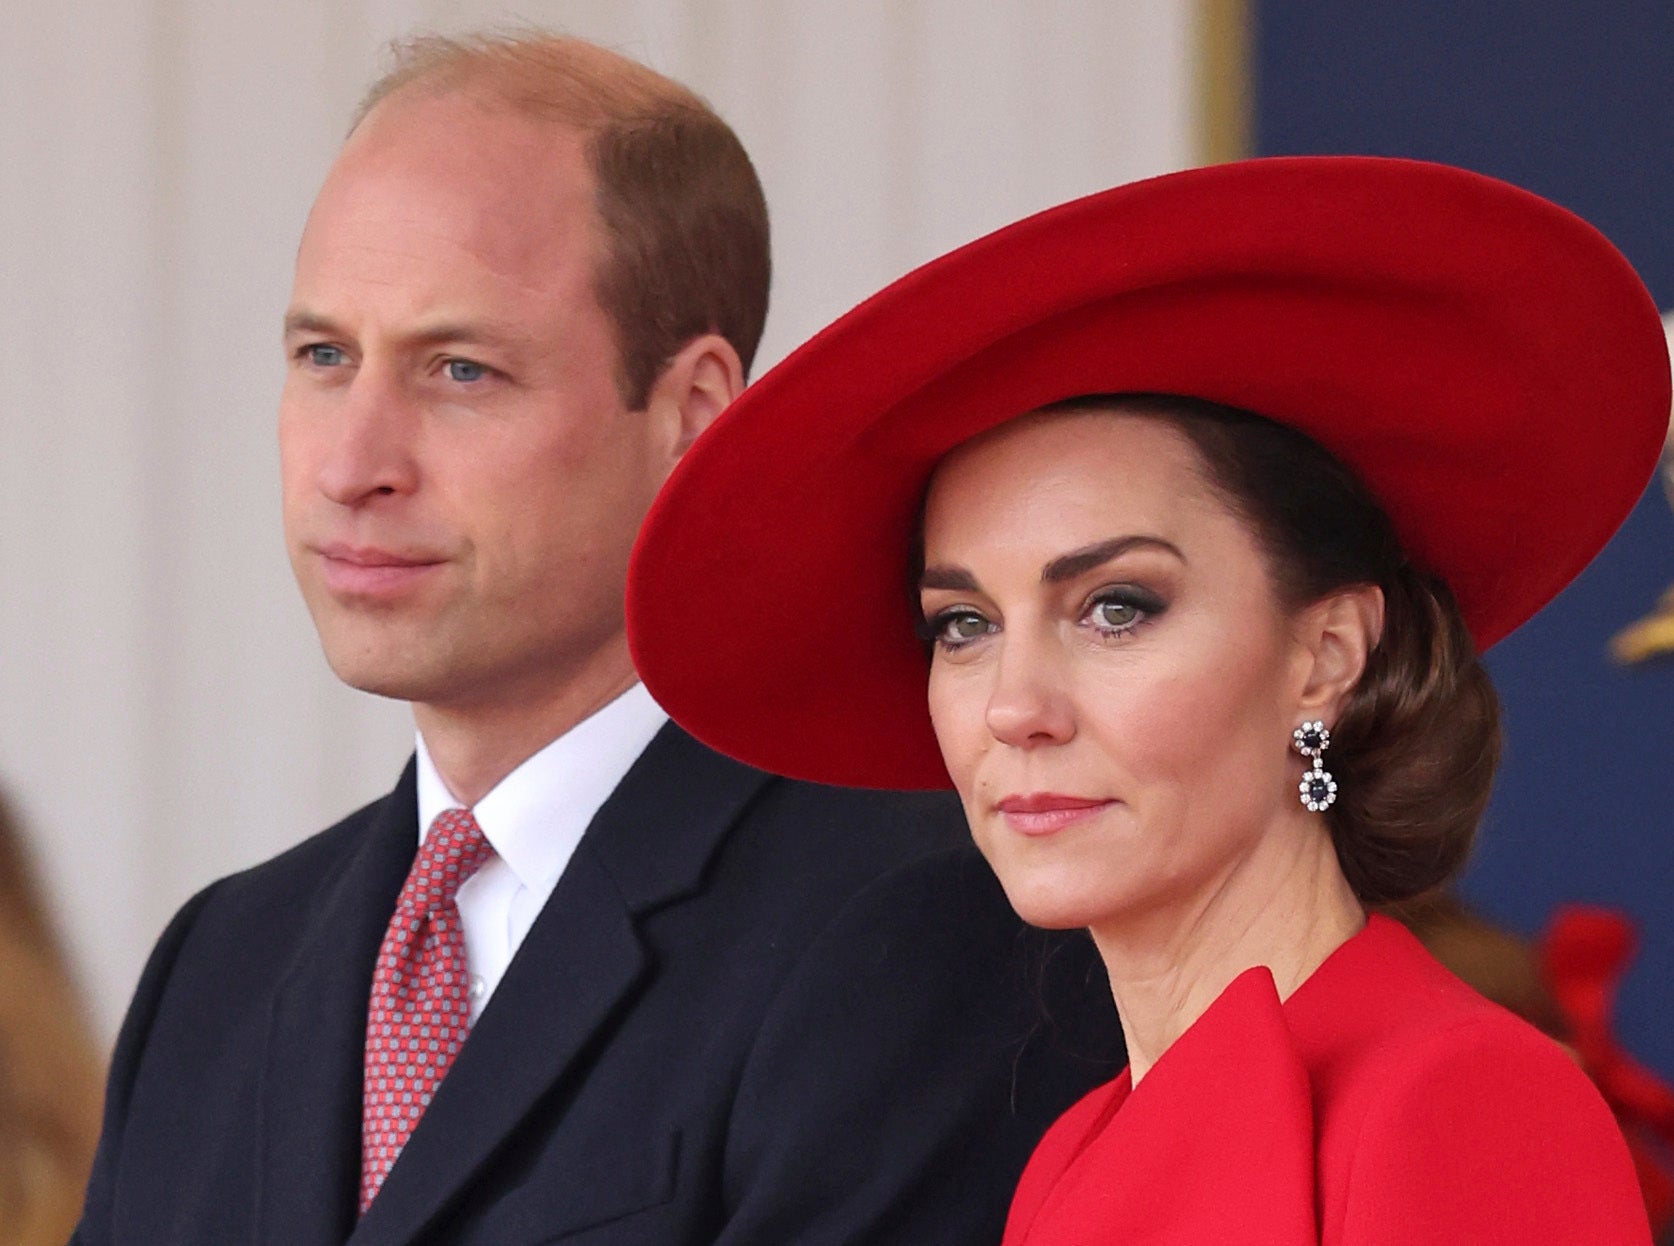 Prince William, left, and Britain's Kate, Princess of Wales, attend a ceremonial welcome for the President and the First Lady of the Republic of Korea at Horse Guards Parade in London, England on November 21, 2023